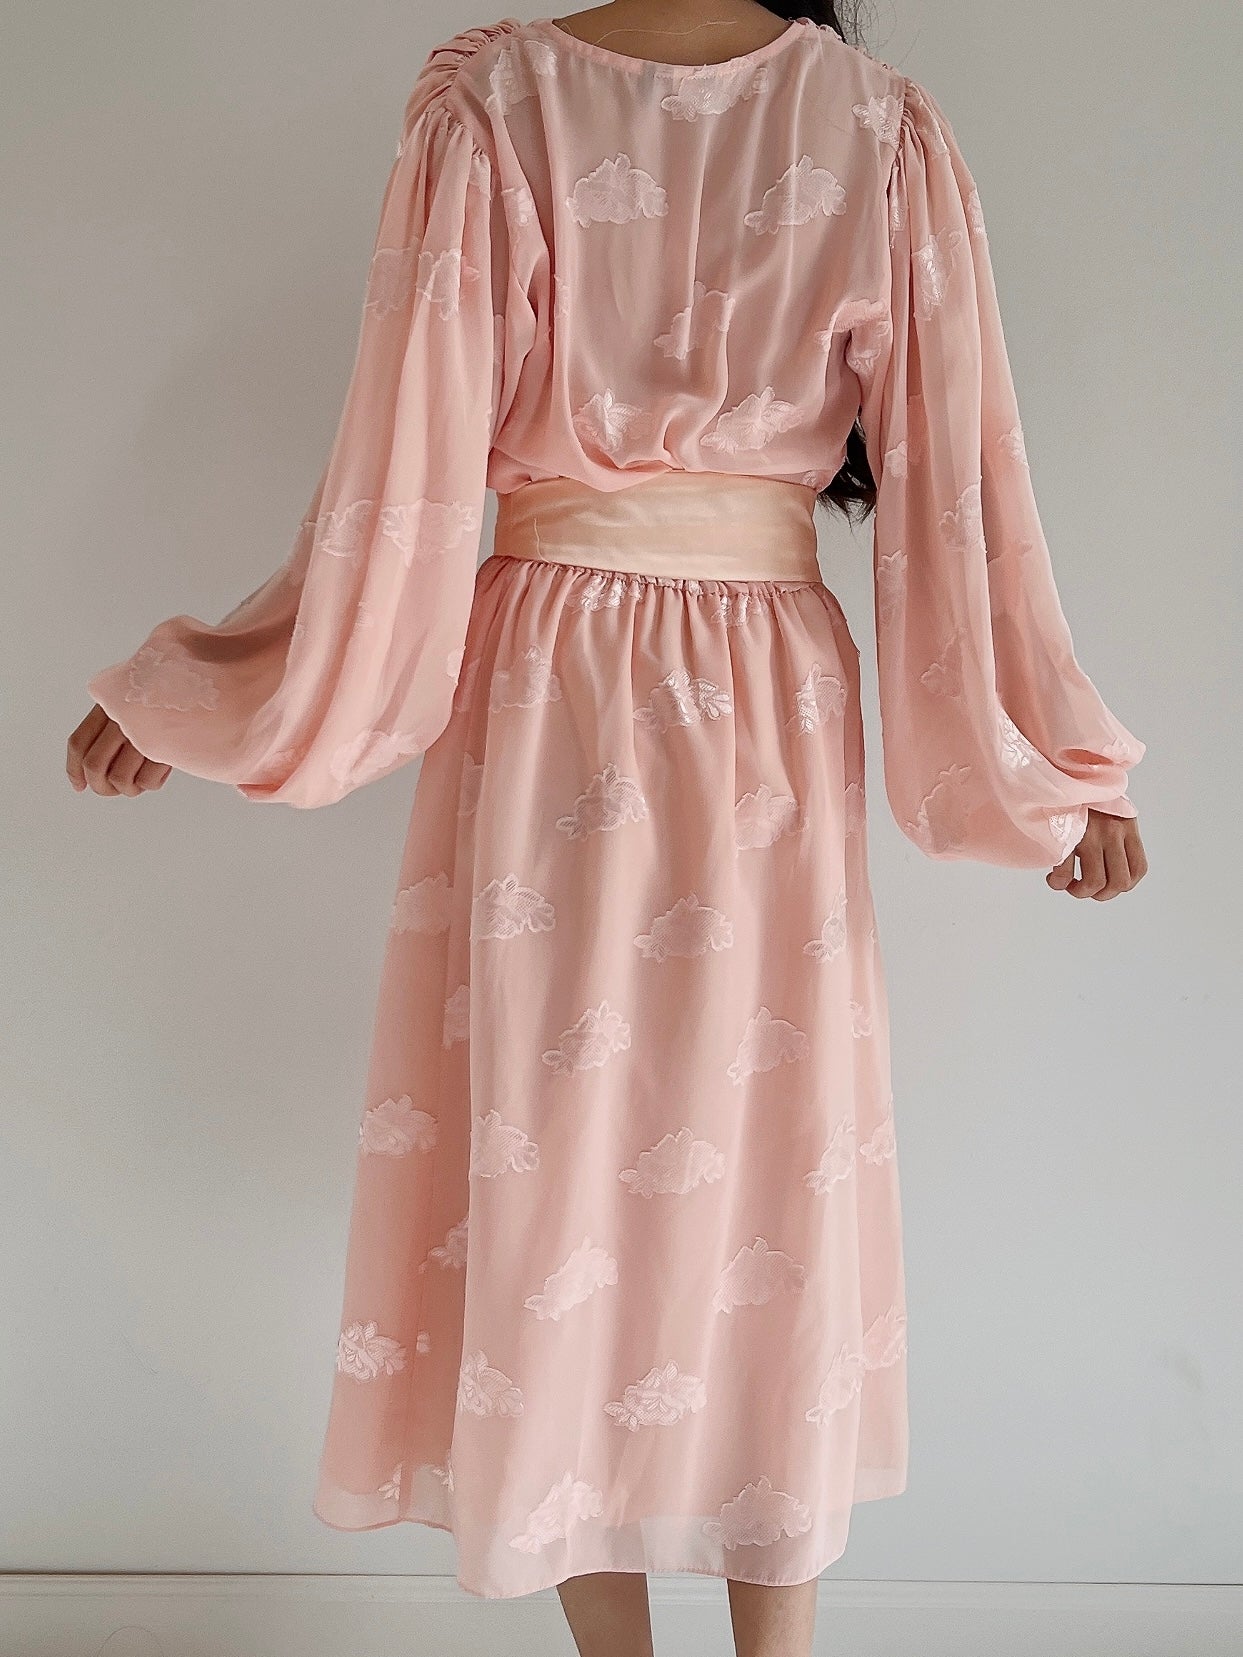 1980s Pink Puffed Sleeves Faux Wrap Dress - M